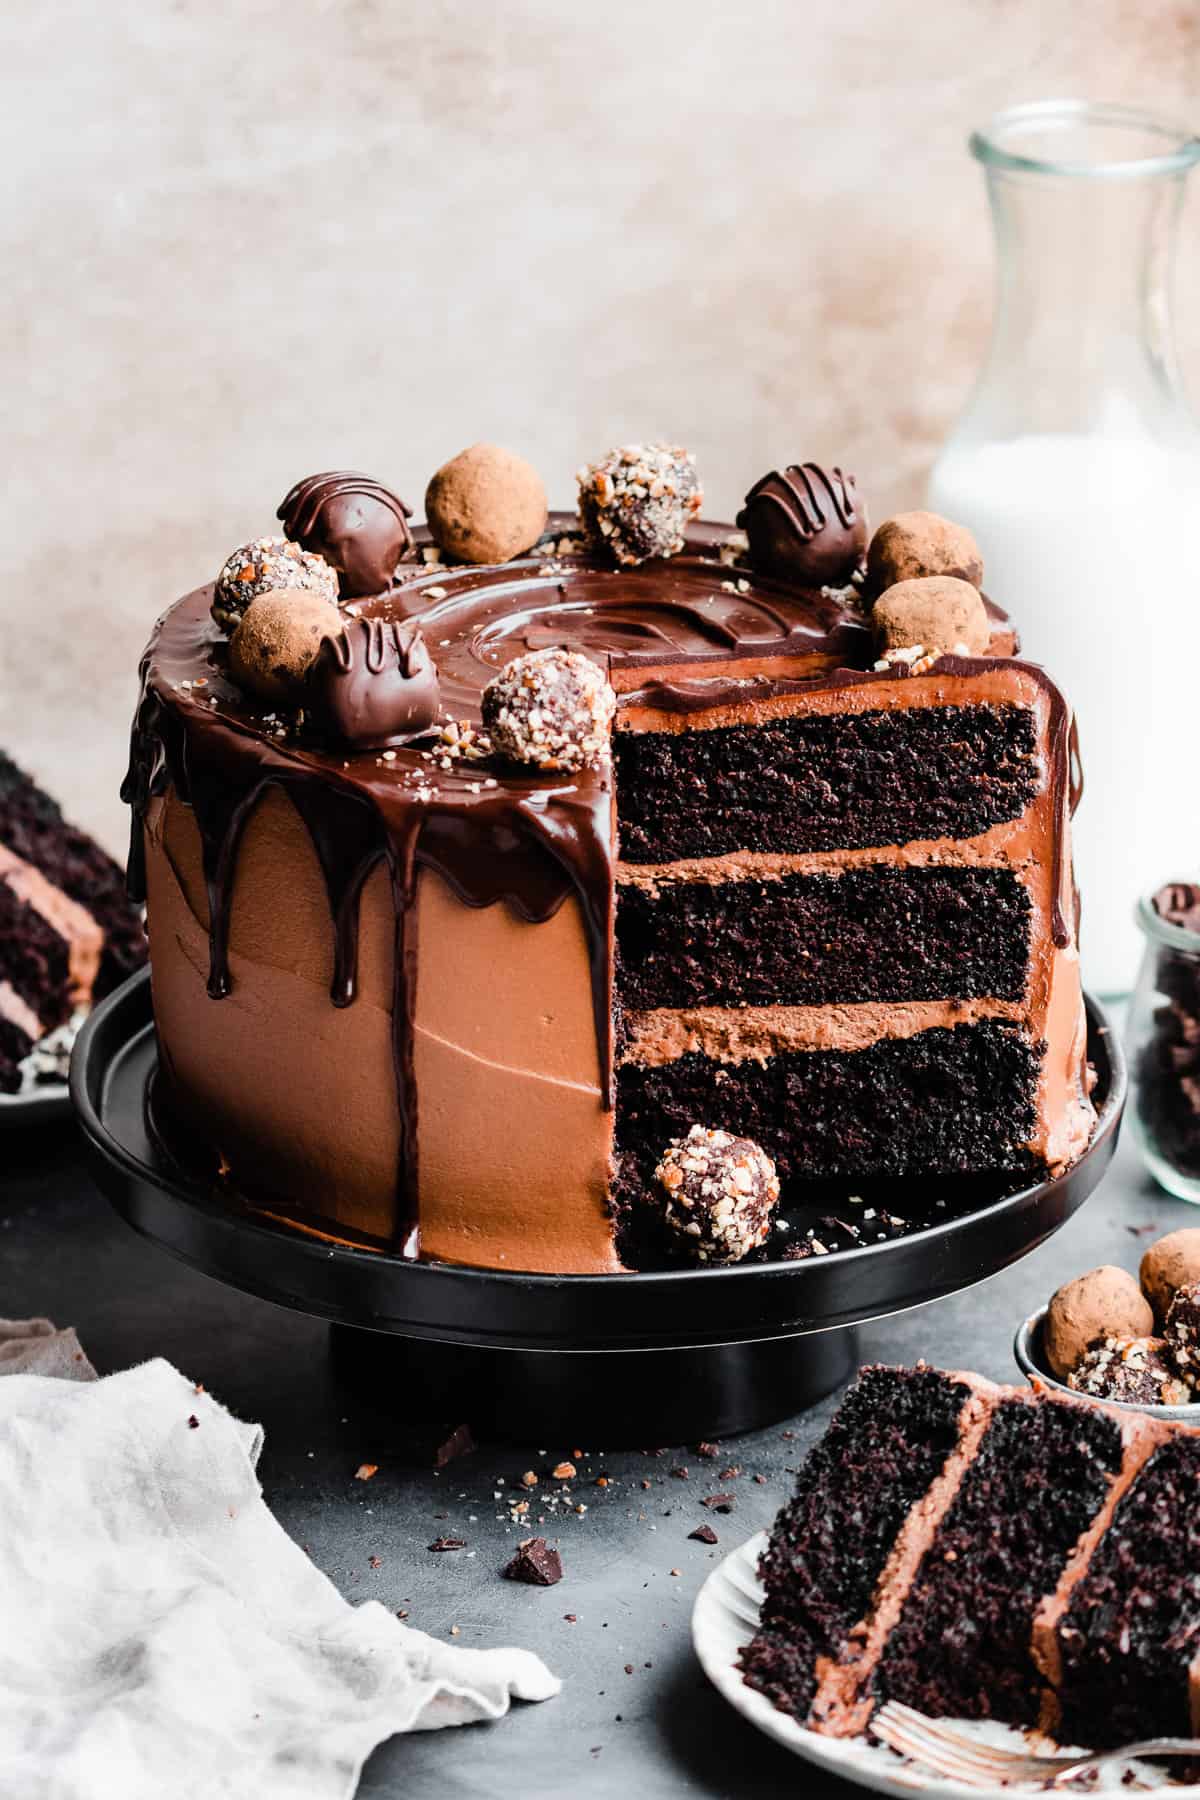 The sliced chocolate truffle cake topped with chocolate drip and truffles, with slices on plates.